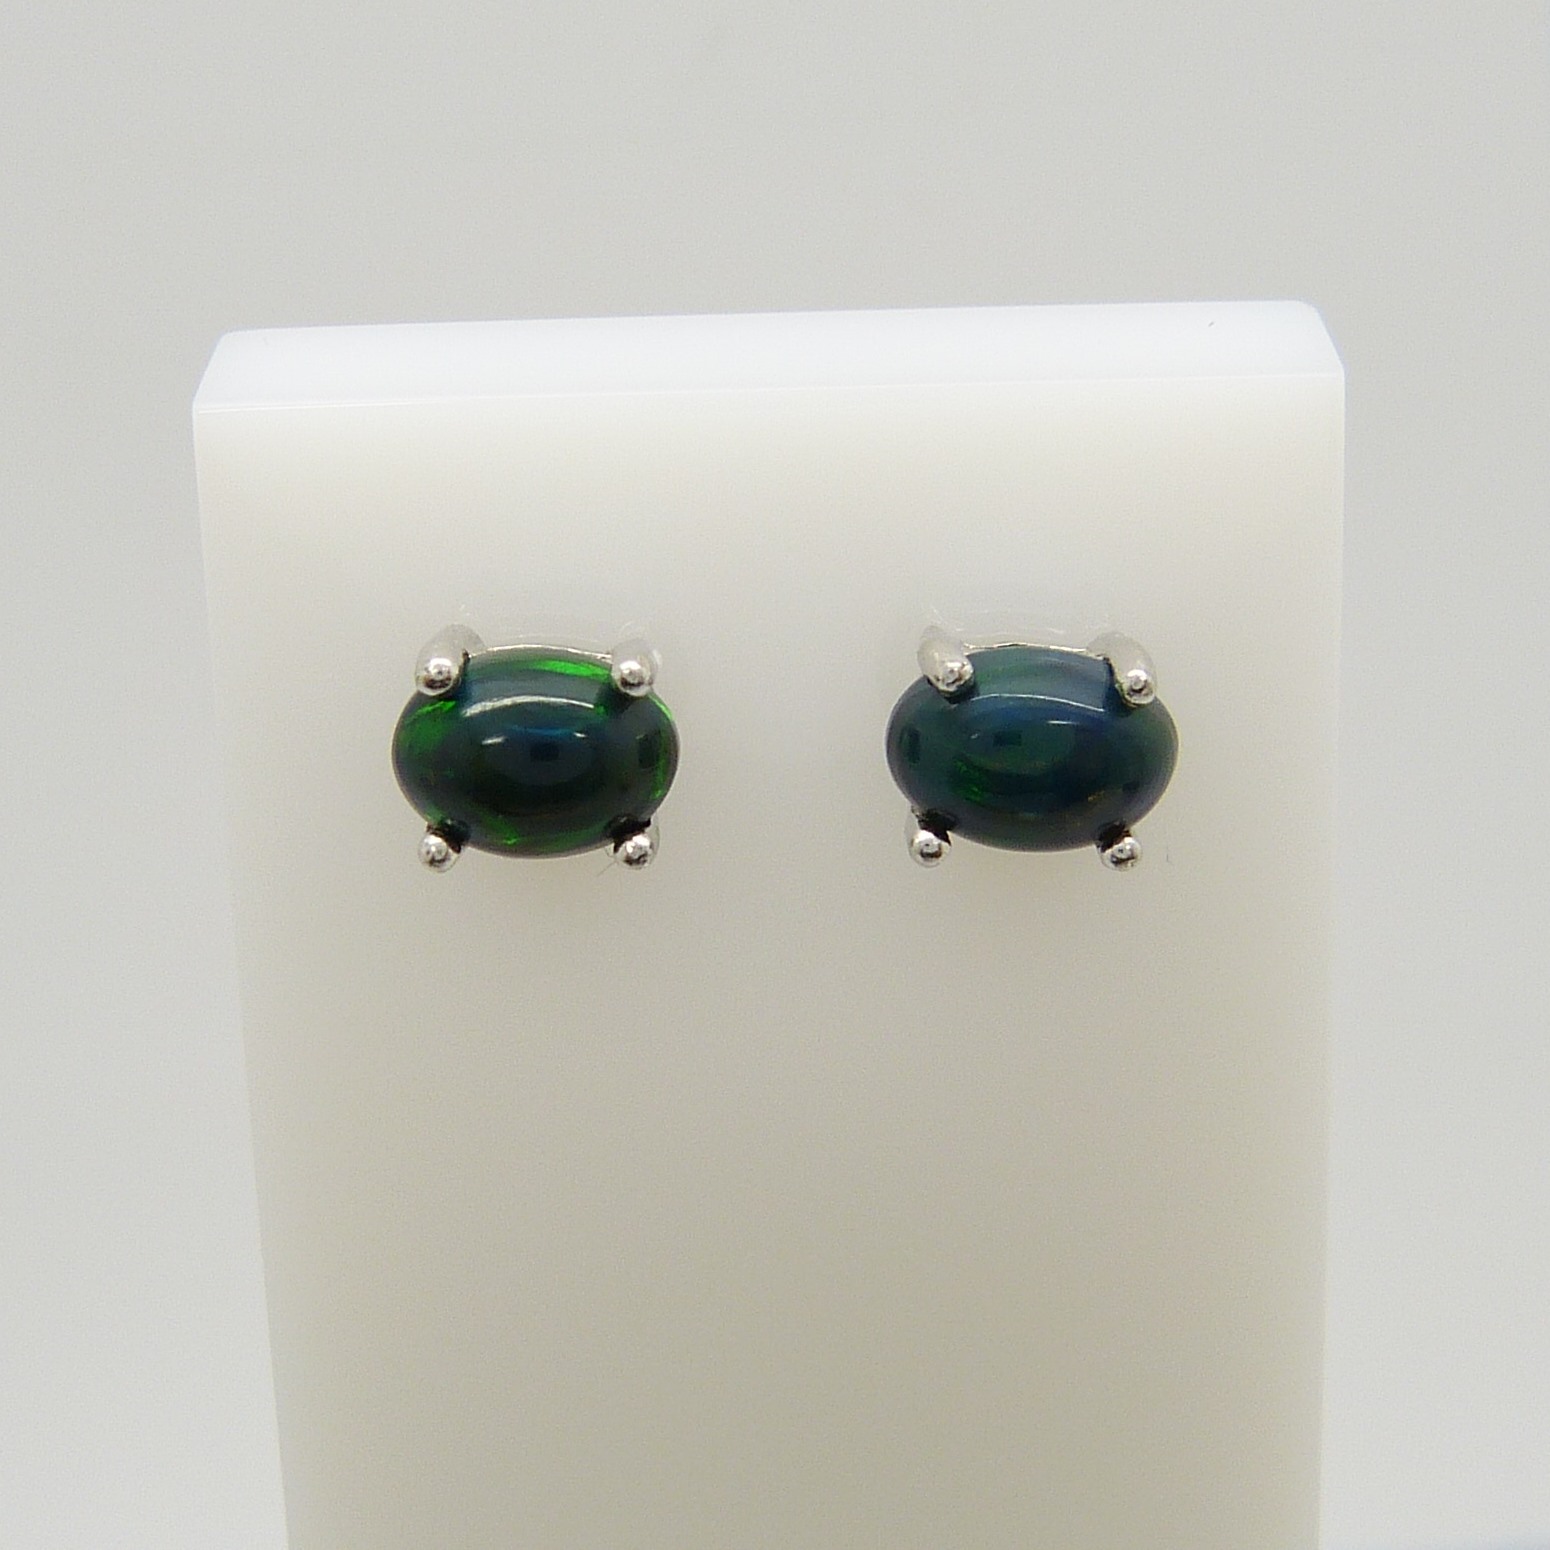 A pair of silver ear studs set with cabochon black Ethiopian opals, 1.10 carats (approx) - Image 4 of 5